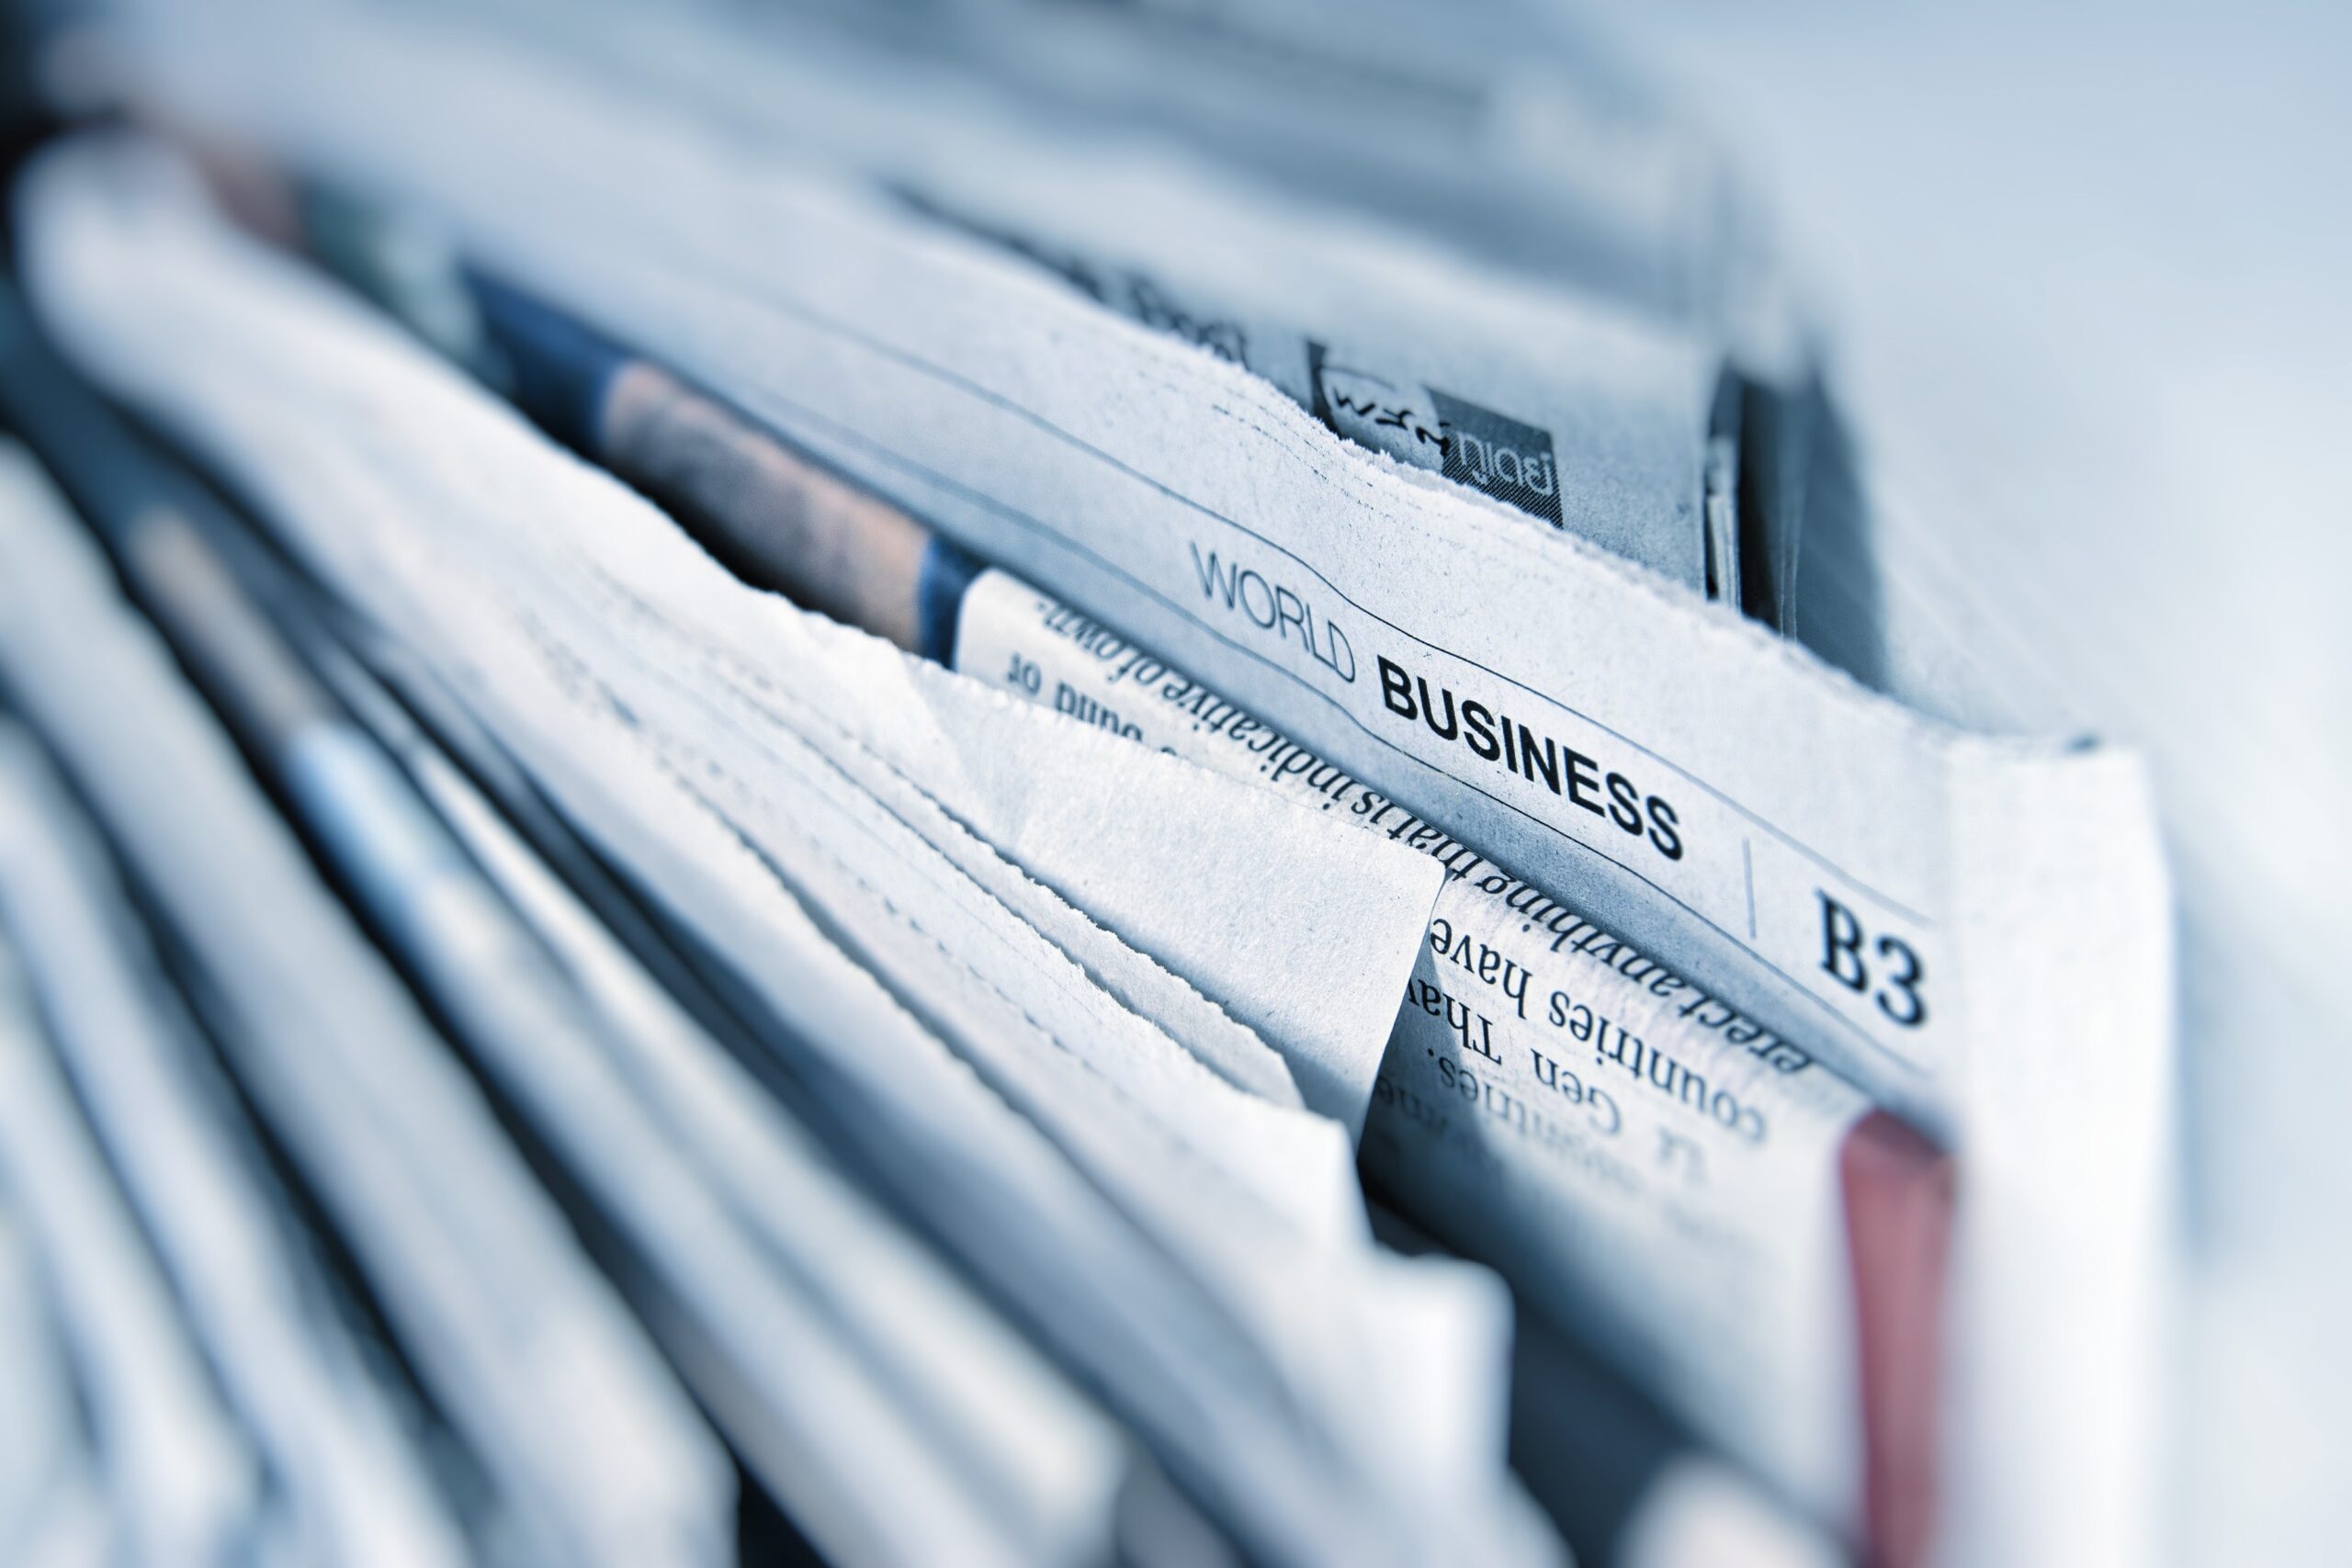 Public Relations Newspapers and Print Media